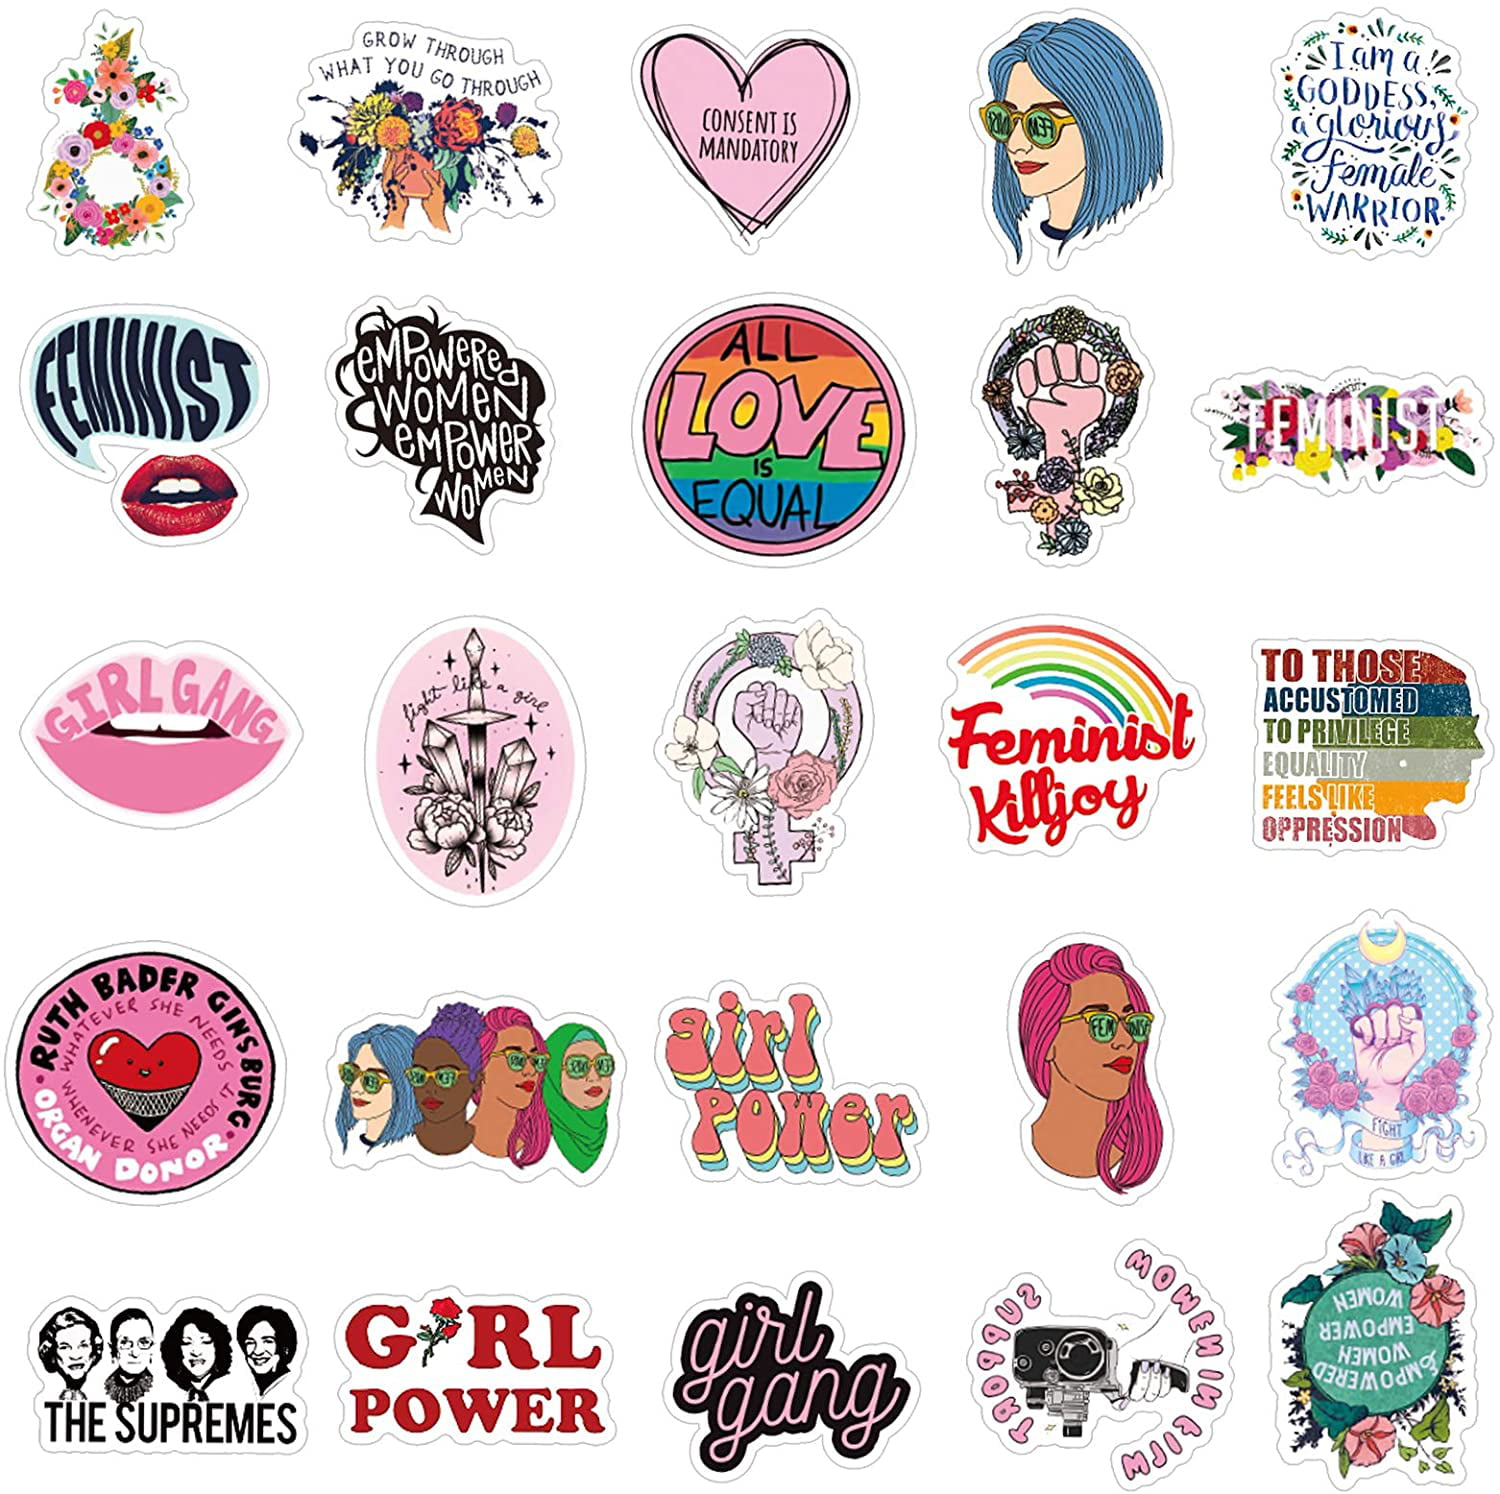 Feminist Stickers Feminist Stickers Vinyl Waterproof Stickers for Laptop,Bumper,Water Bottles,Computer,Phone,Hard hat,Car Stickers and Decals 50 Pcak 